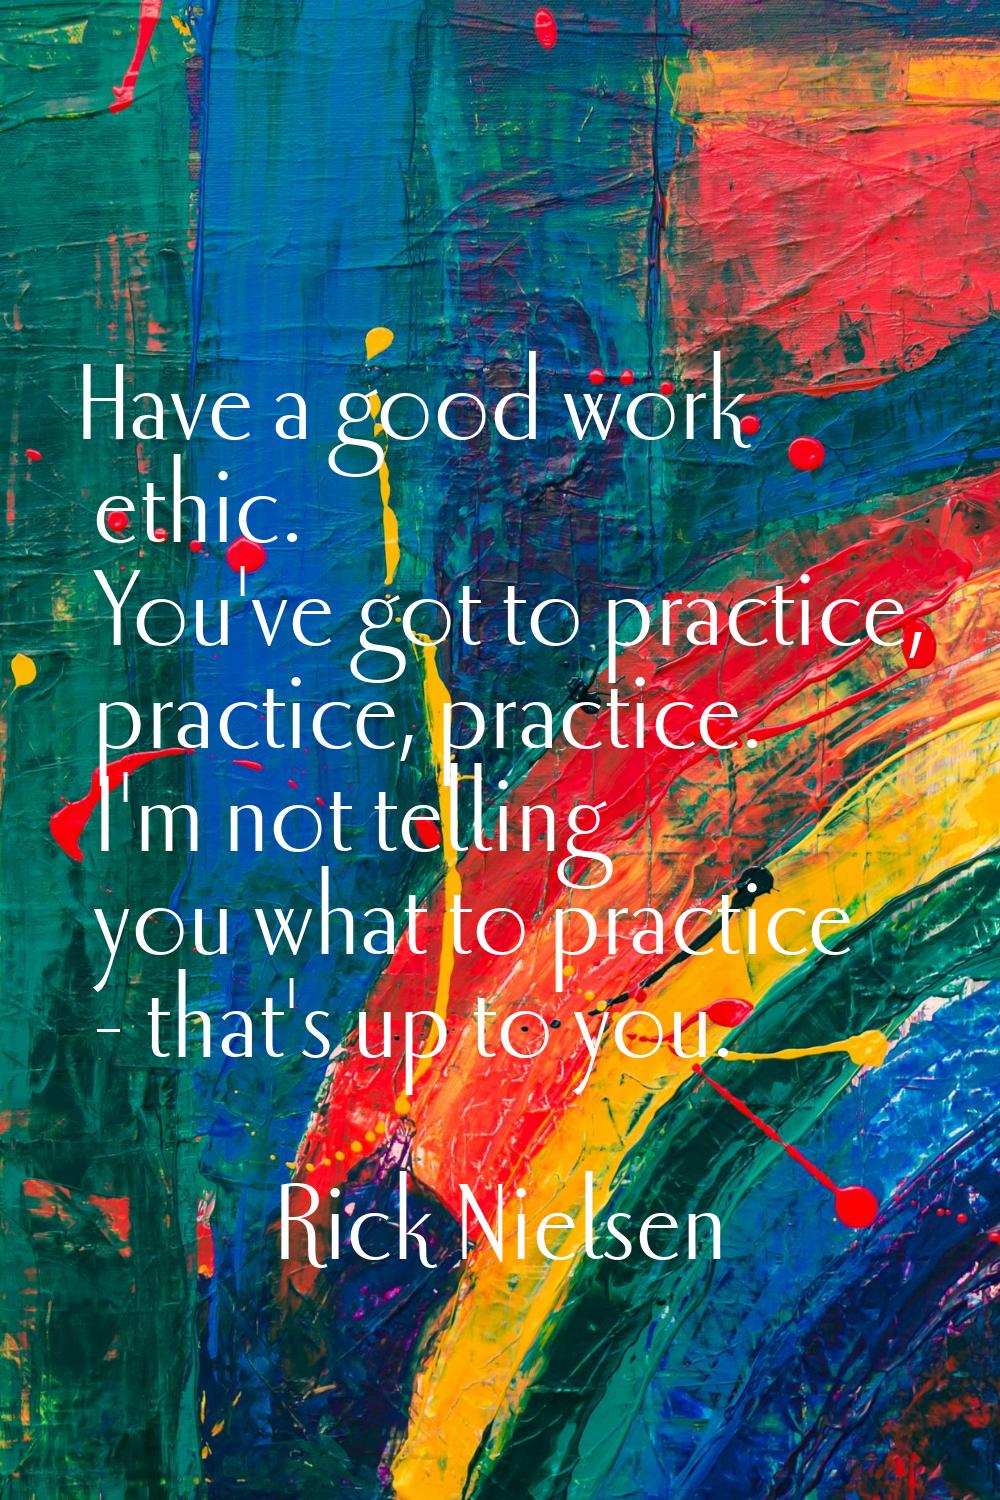 Have a good work ethic. You've got to practice, practice, practice. I'm not telling you what to pra